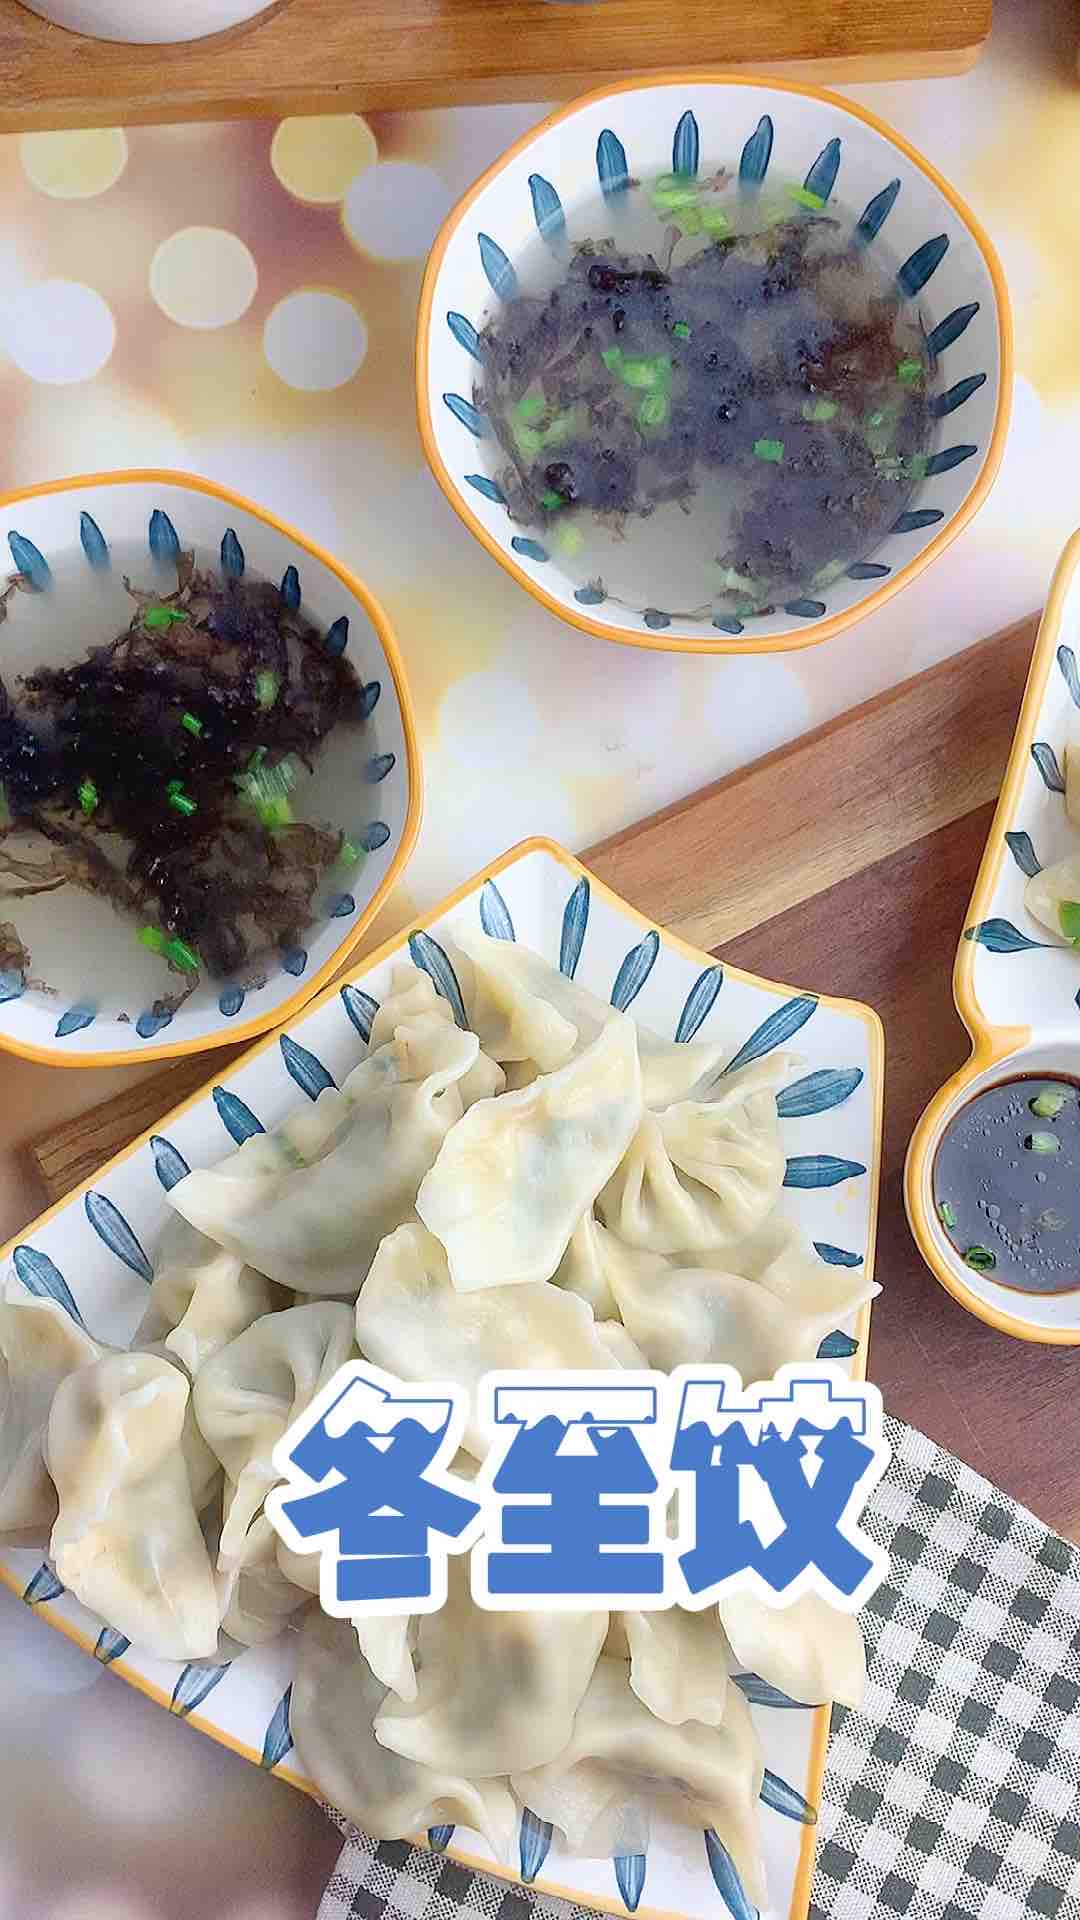 The Winter Solstice is As Big As The Year. Winter Solstice Dumplings are Tender and Fresh Boiled, Crisp and Fragrant